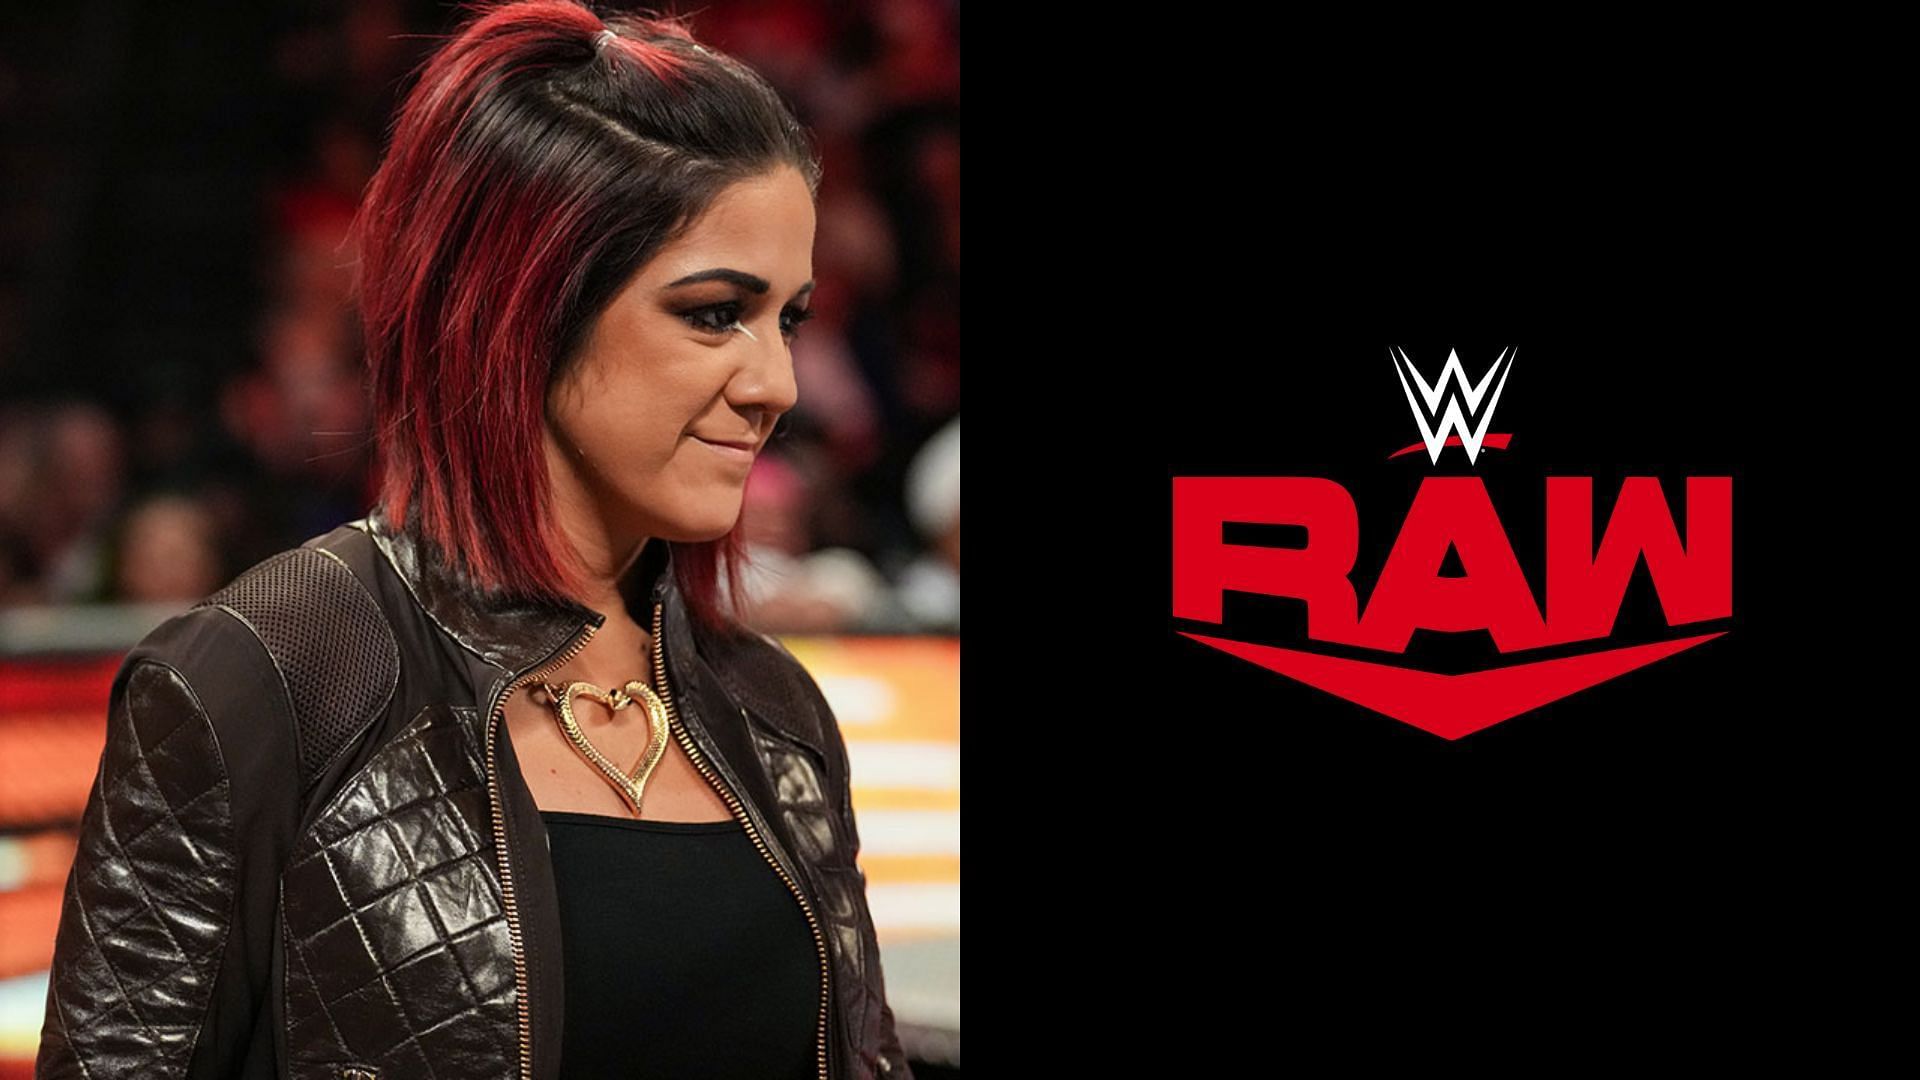 Bayley is currently embroiled in a feud with Becky Lynch on WWE RAW